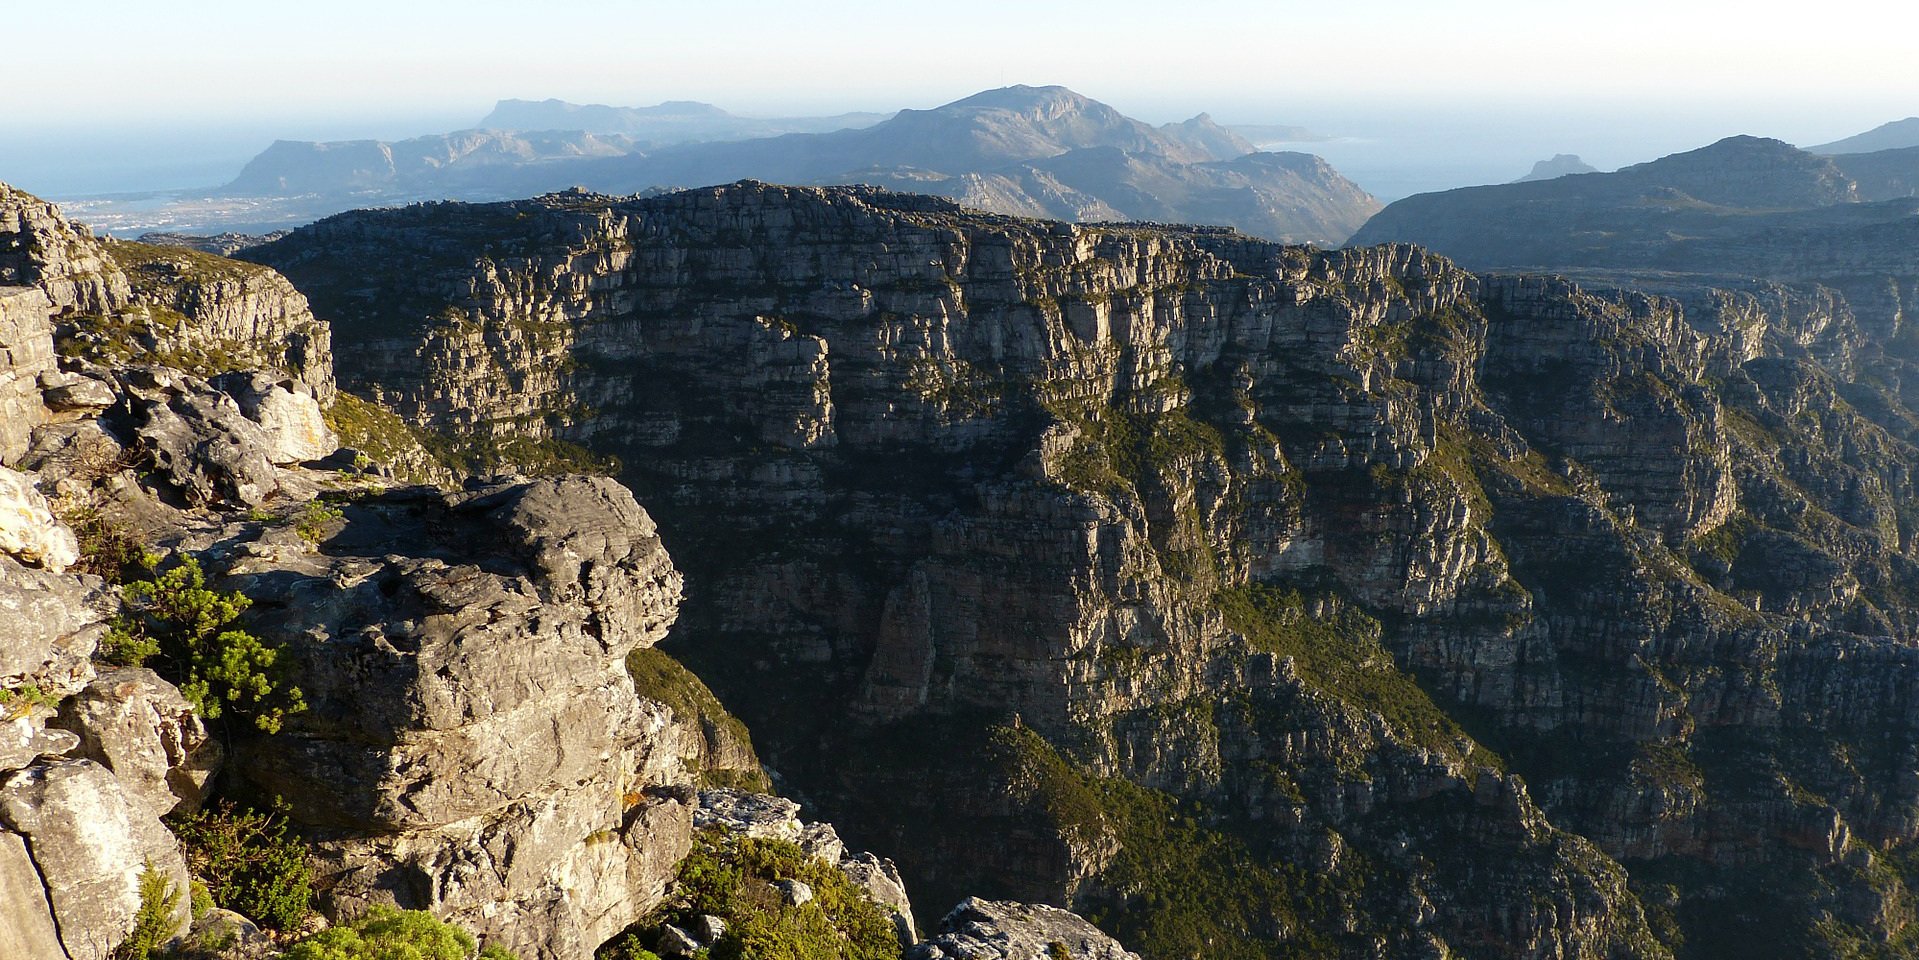 Take advantage of volunteer opportunities in cape town and visit iconic sites such as table mountain.